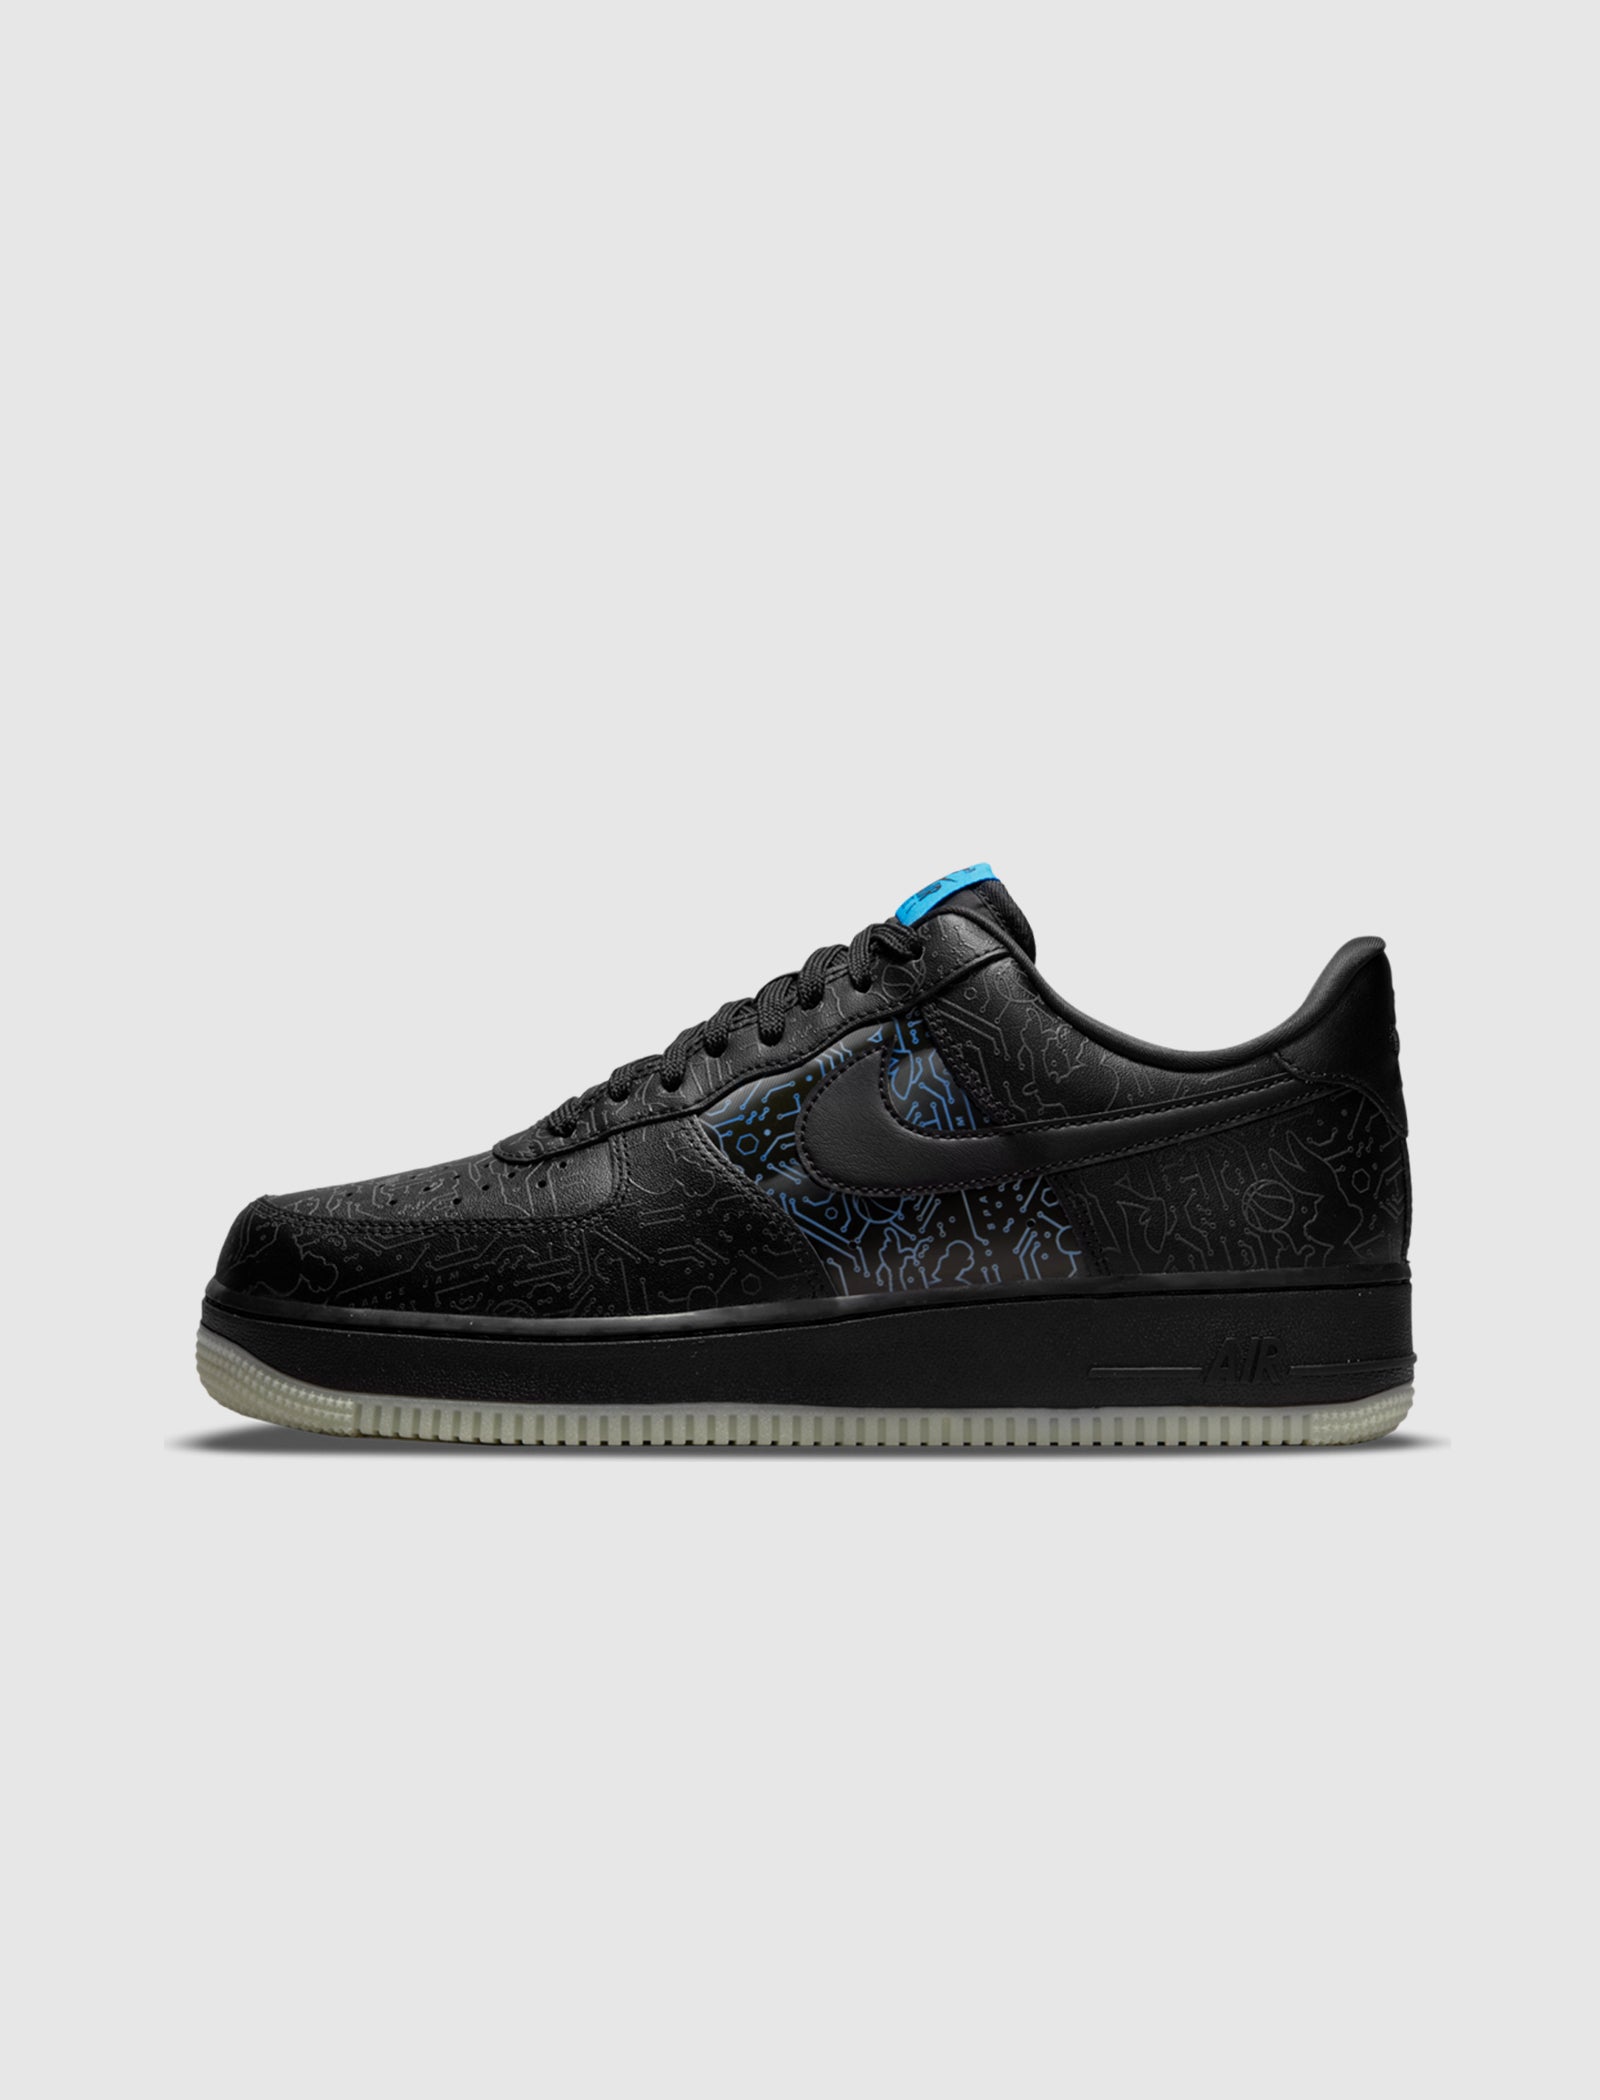 Air Force 1 Space Jam Computer Chip GS 6.5Y/W 8